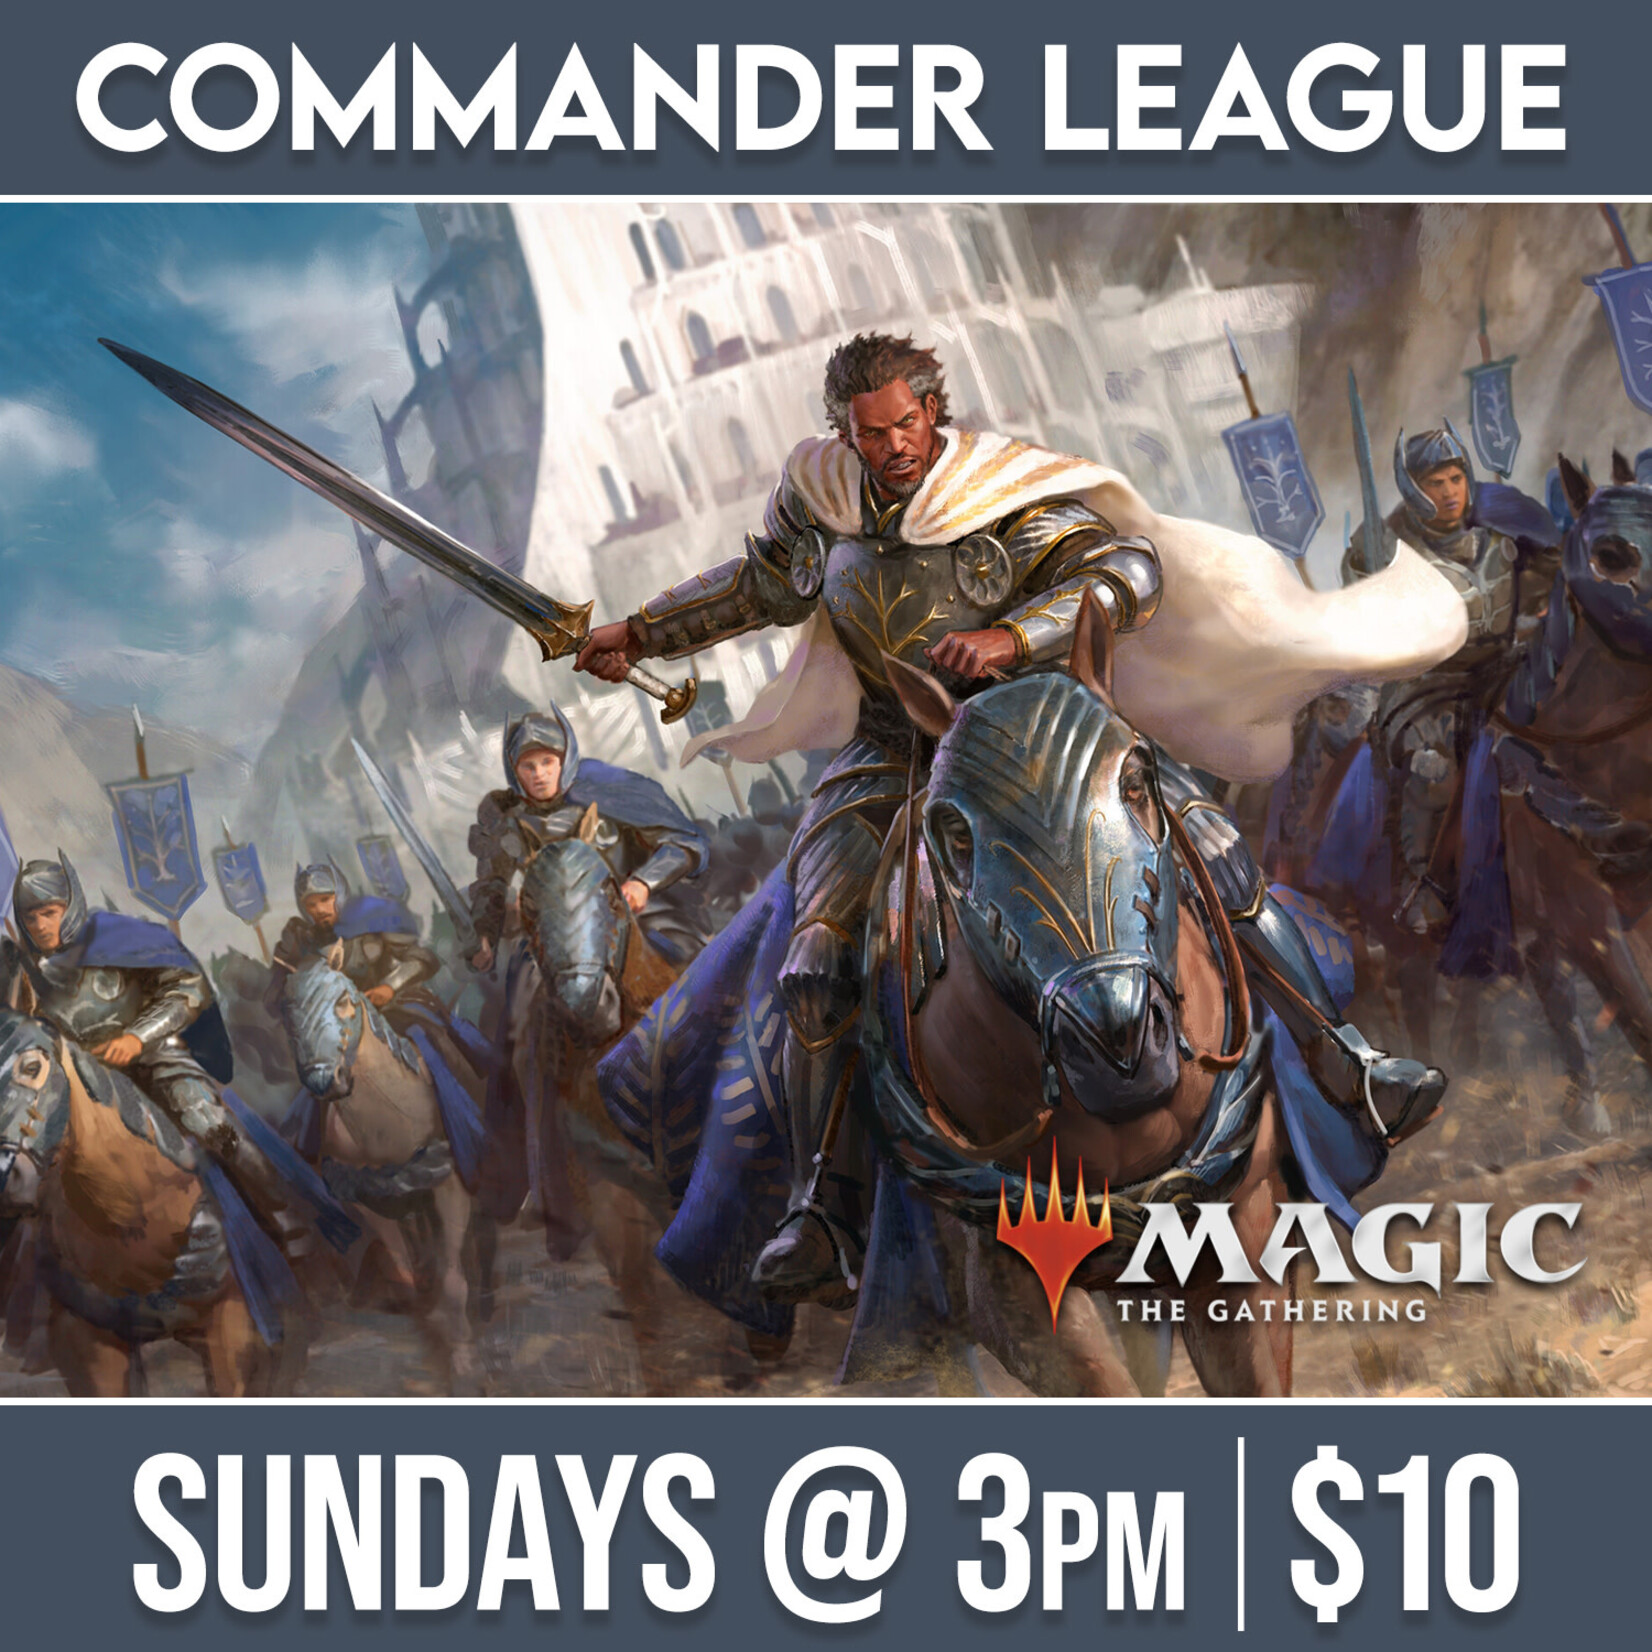 Magic: the Gathering Events 05/05 Sunday @ 3 PM - Commander League